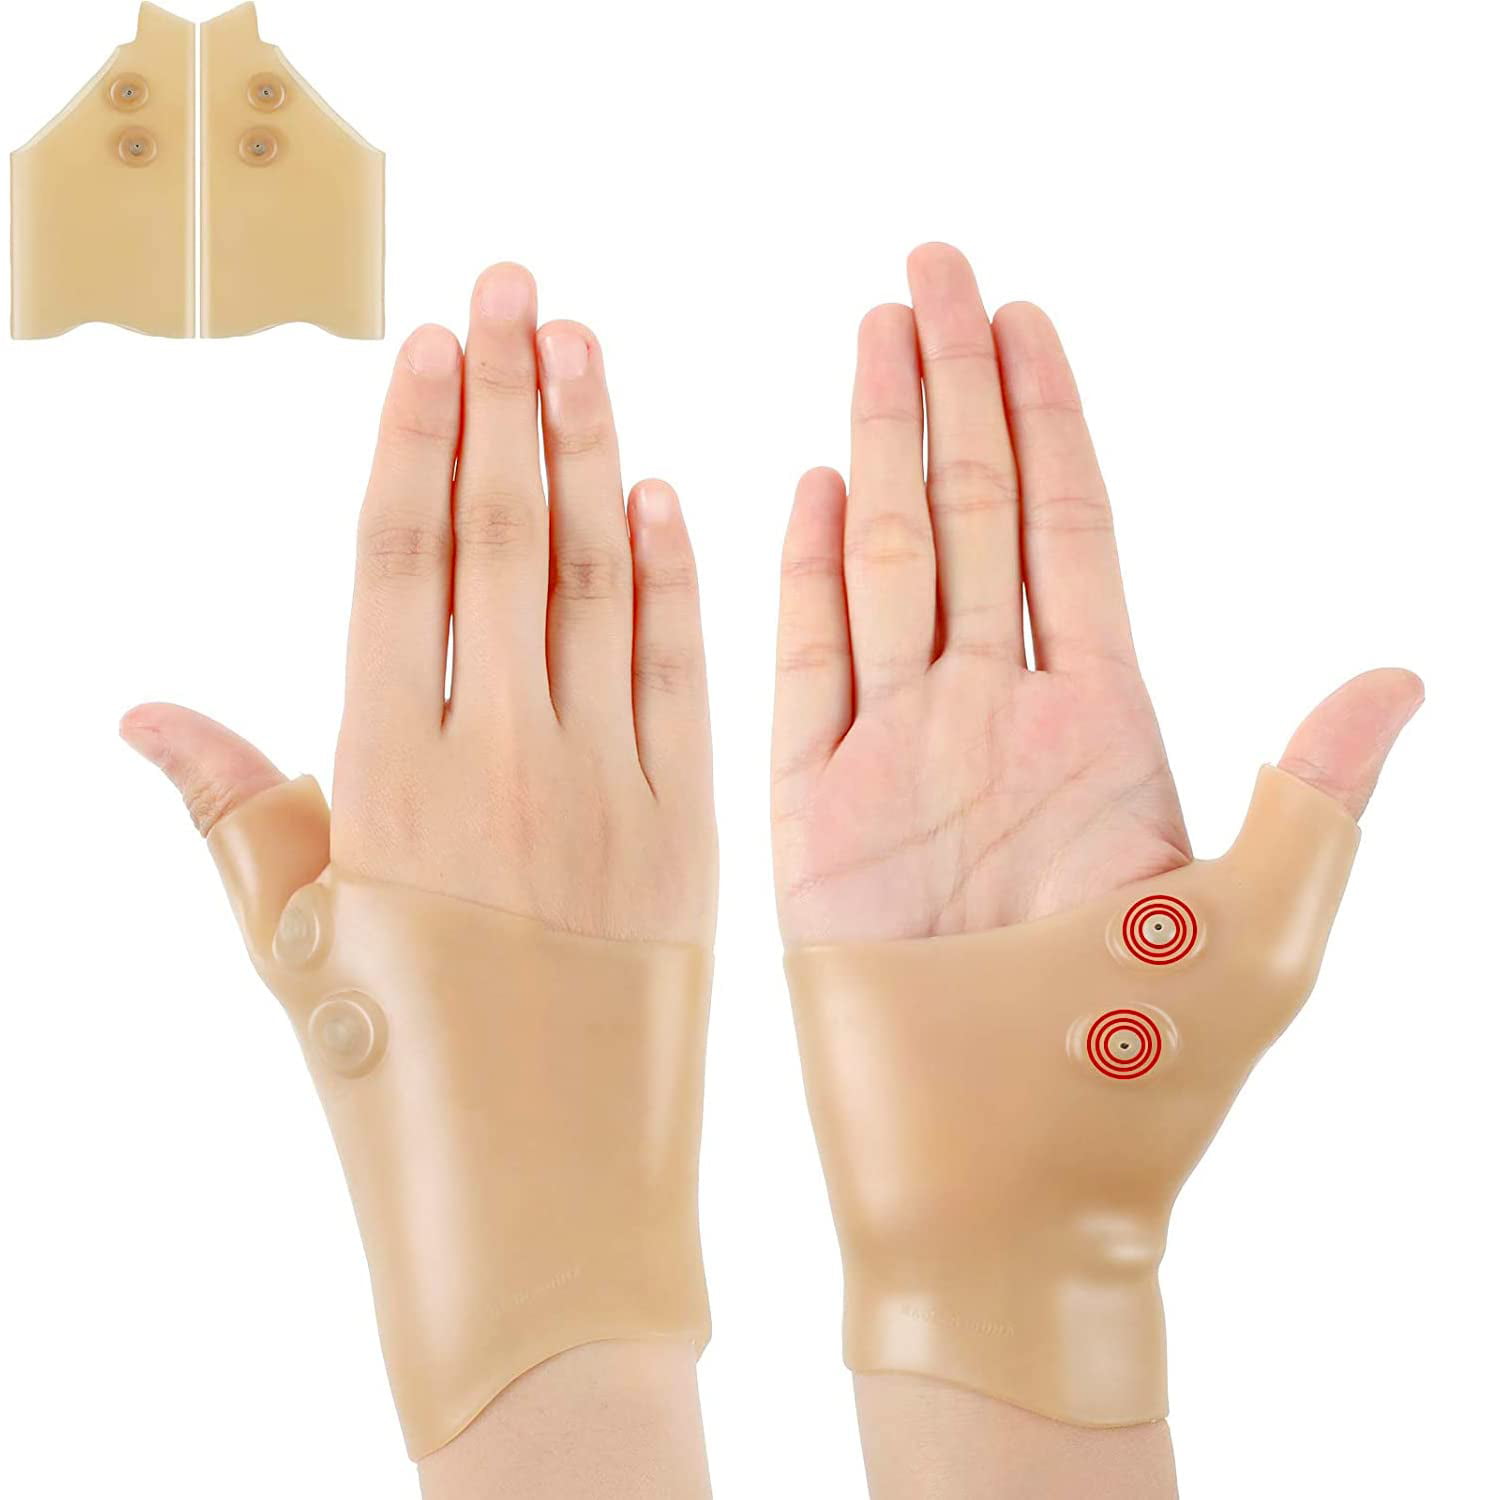 US Magnetic Therapy Thumb Splint Wrist And Thumb Support Brace Sleeves Gloves 